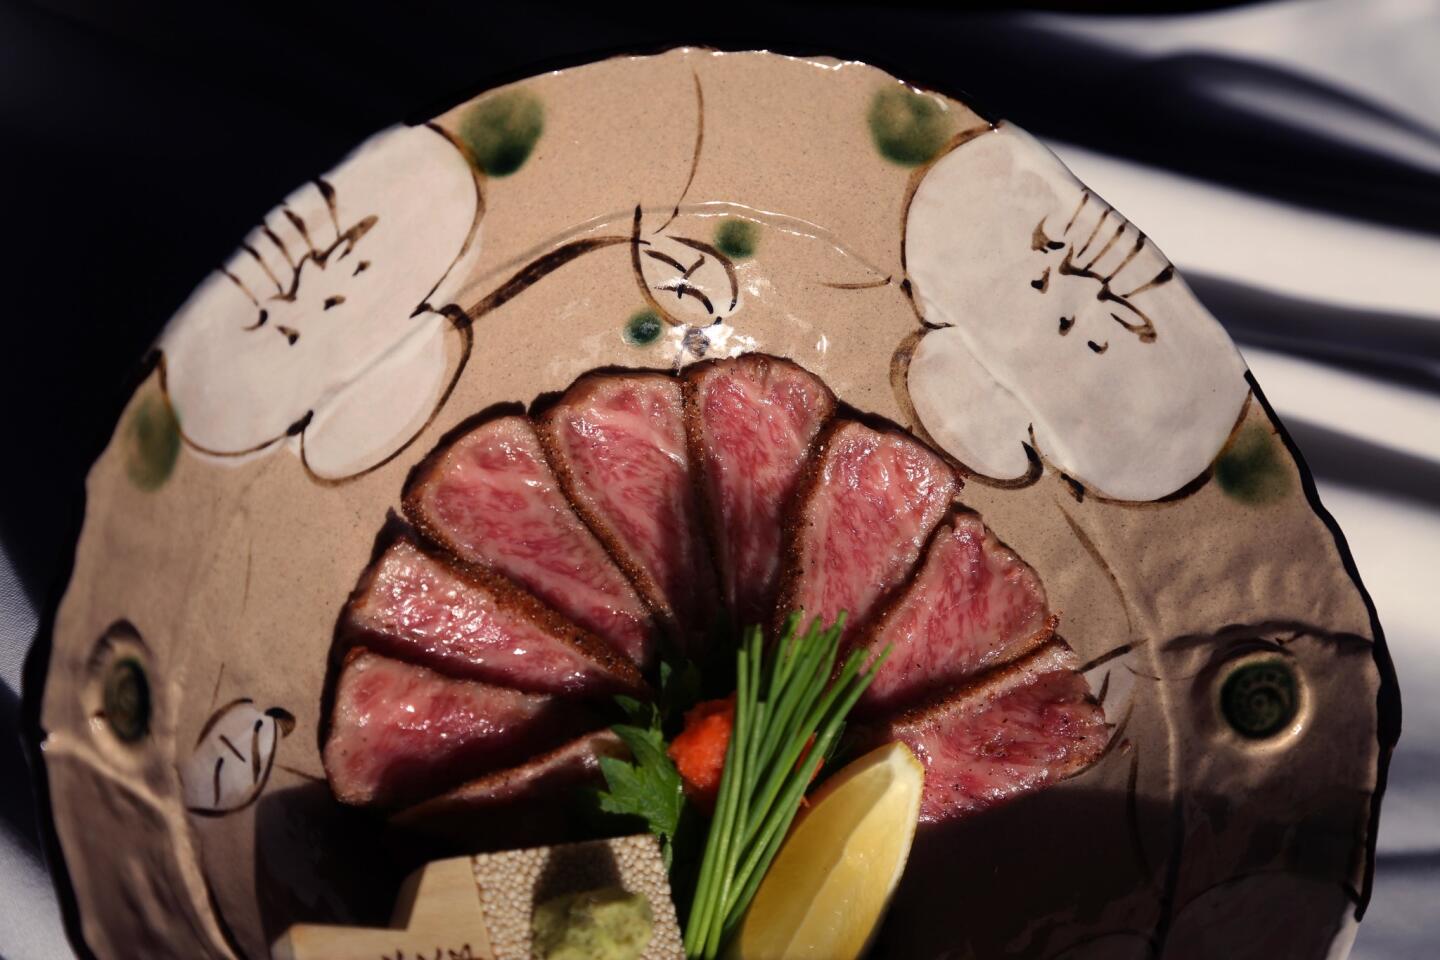 Wagyu beef tataki with fresh wasabi. The meat is lightly seared, marinated and sliced thinly, similar to sashimi.